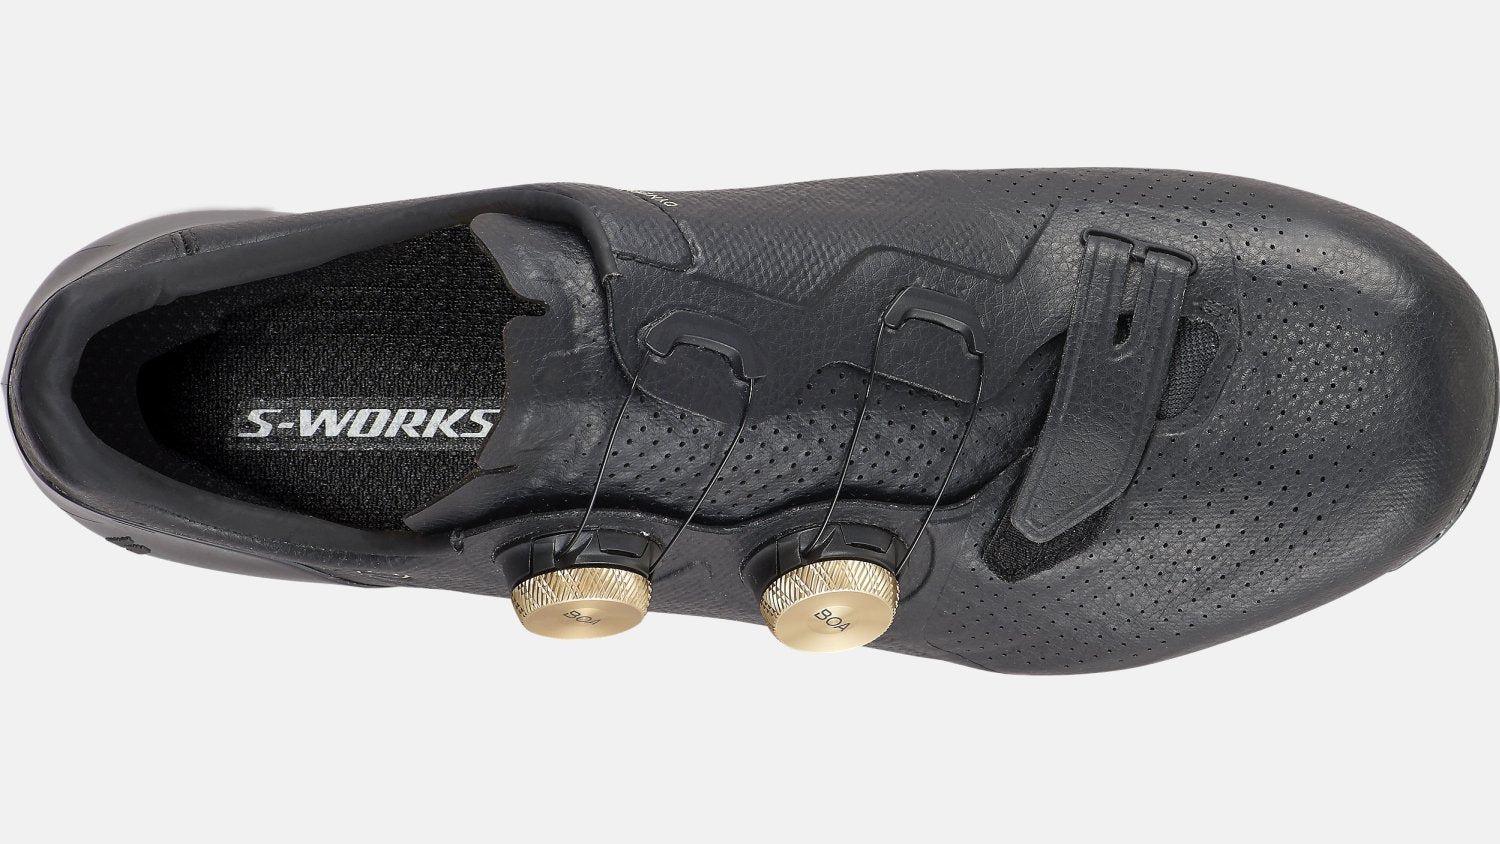 Specialized S-Works 7 Road Shoes - Sagan Collection: Disruption - Liquid-Life